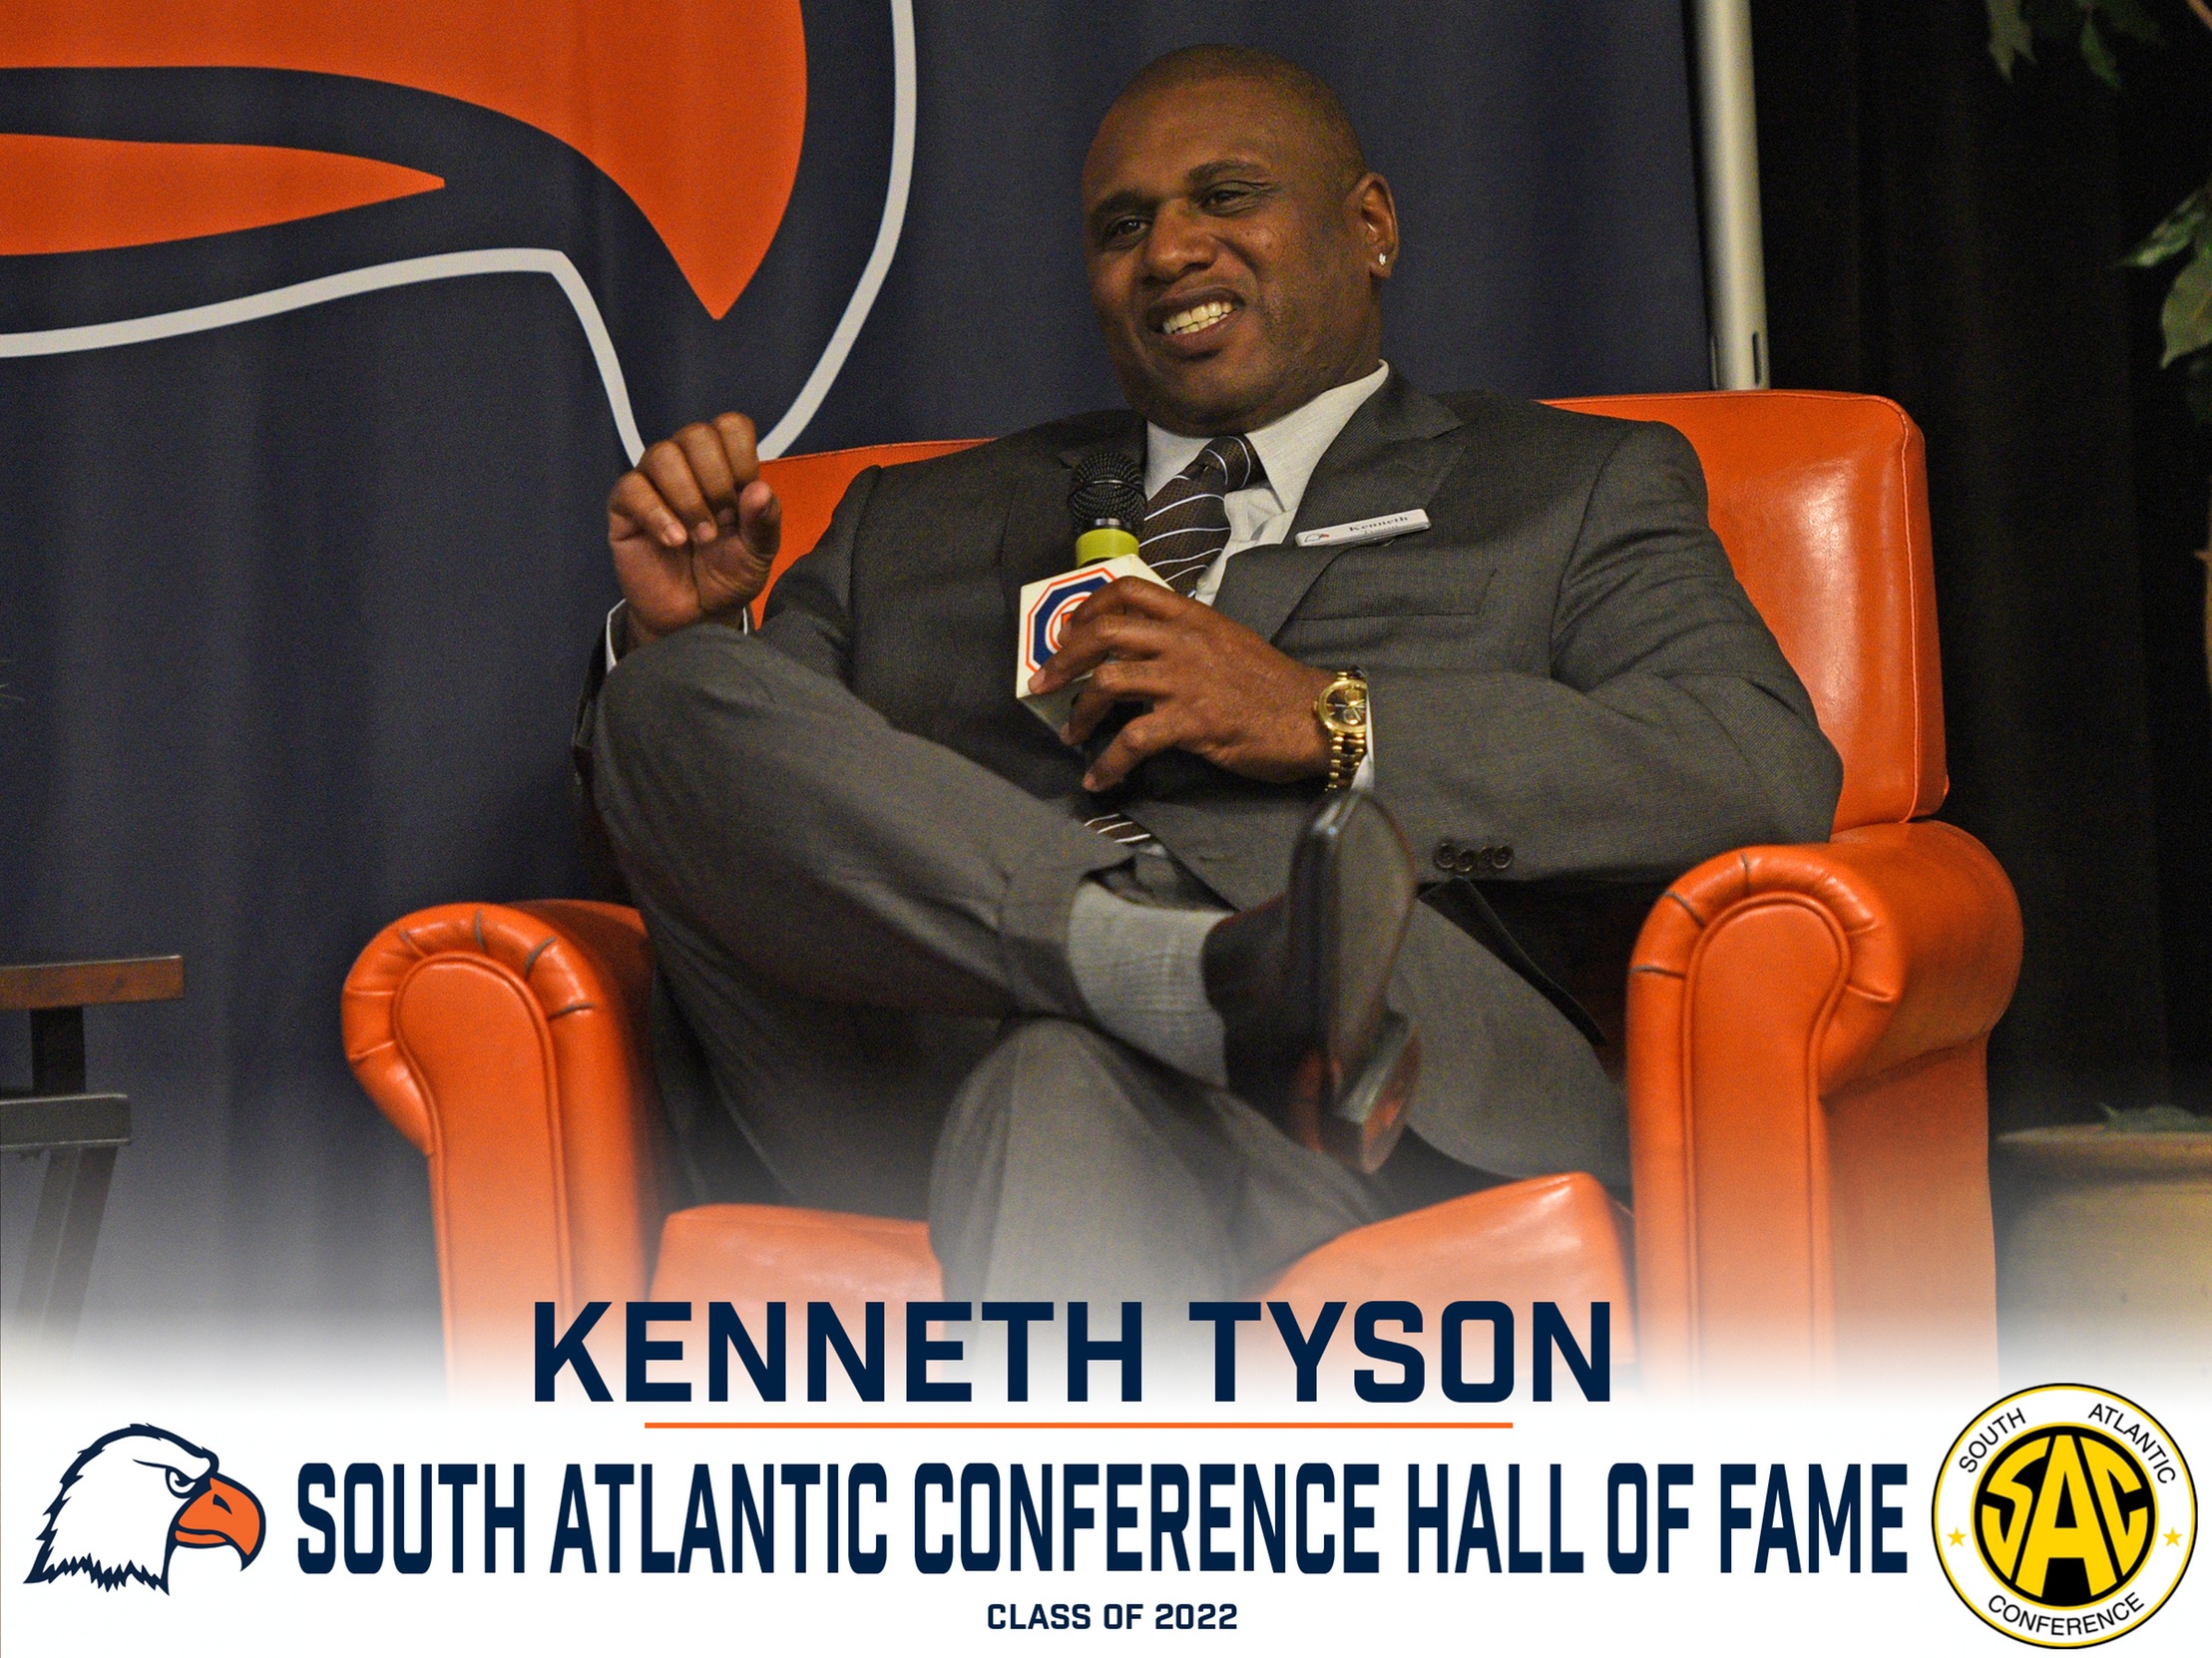 Tyson slated for induction into SAC Hall of Fame